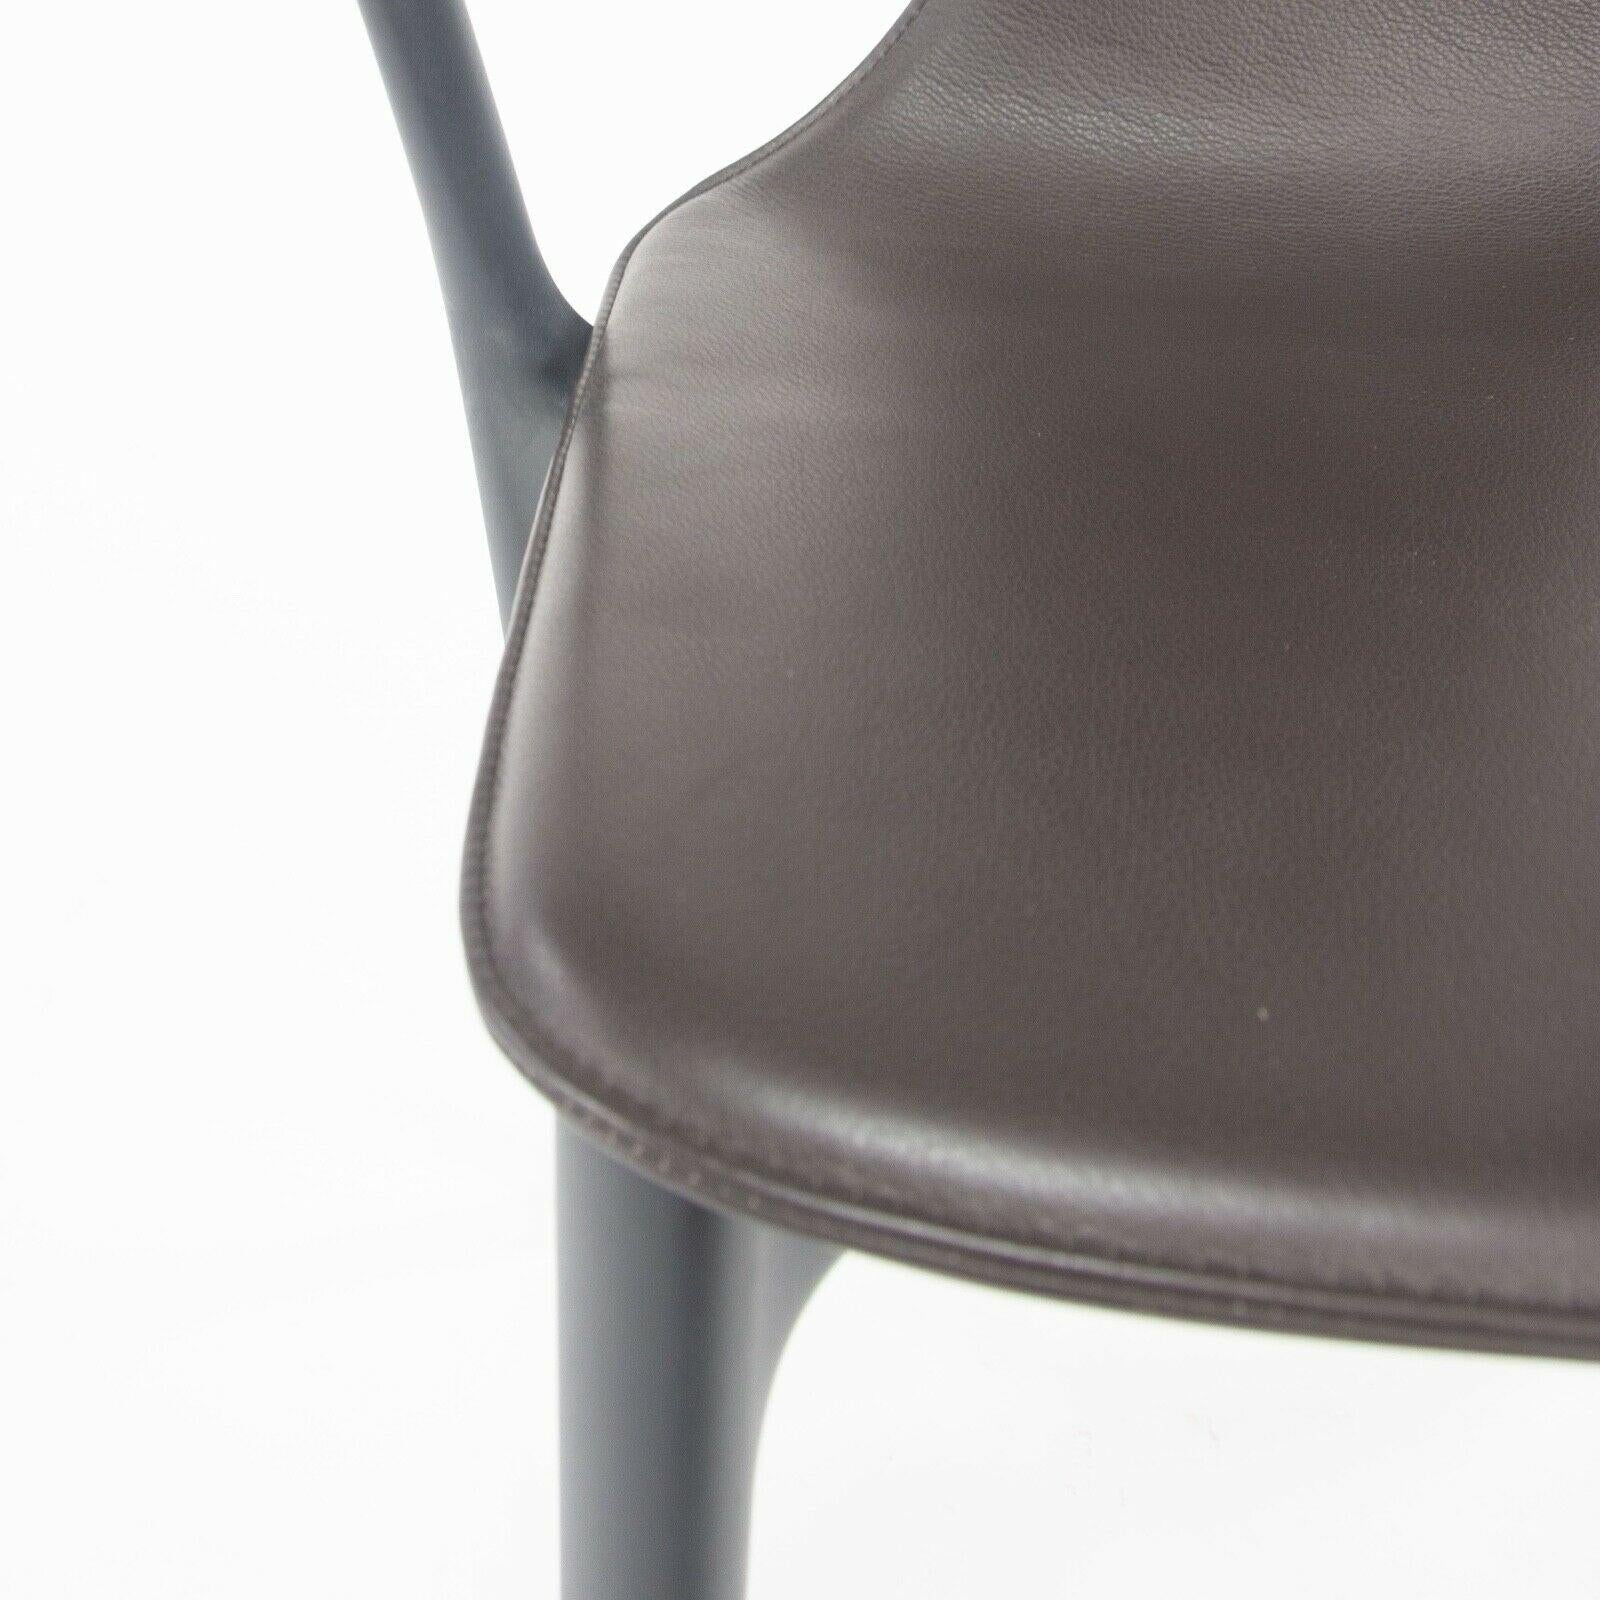 Listed for sale is Belleville Armchair designed by Ronan and Erwan Bouroullec and produced by Vitra. This chair was specified with a black plastic frame and brown leather upholstered seat shell. The condition is described as 